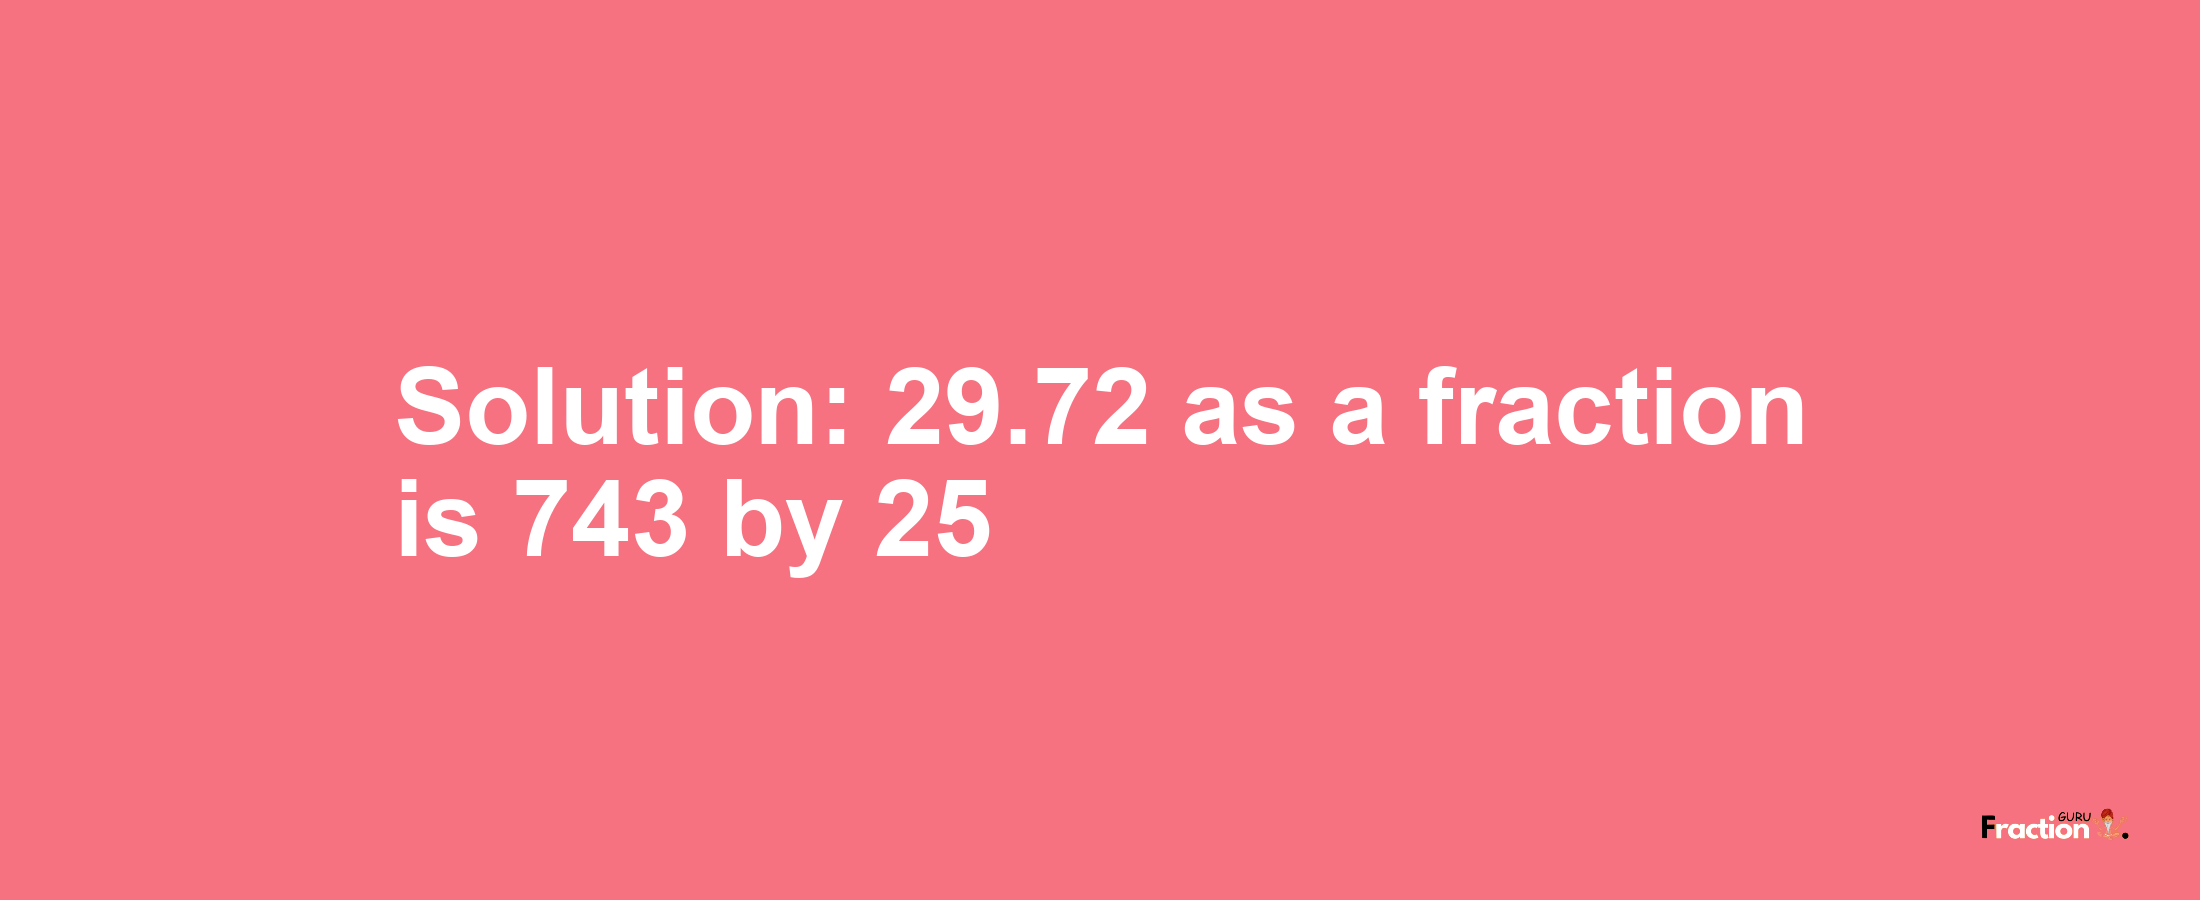 Solution:29.72 as a fraction is 743/25